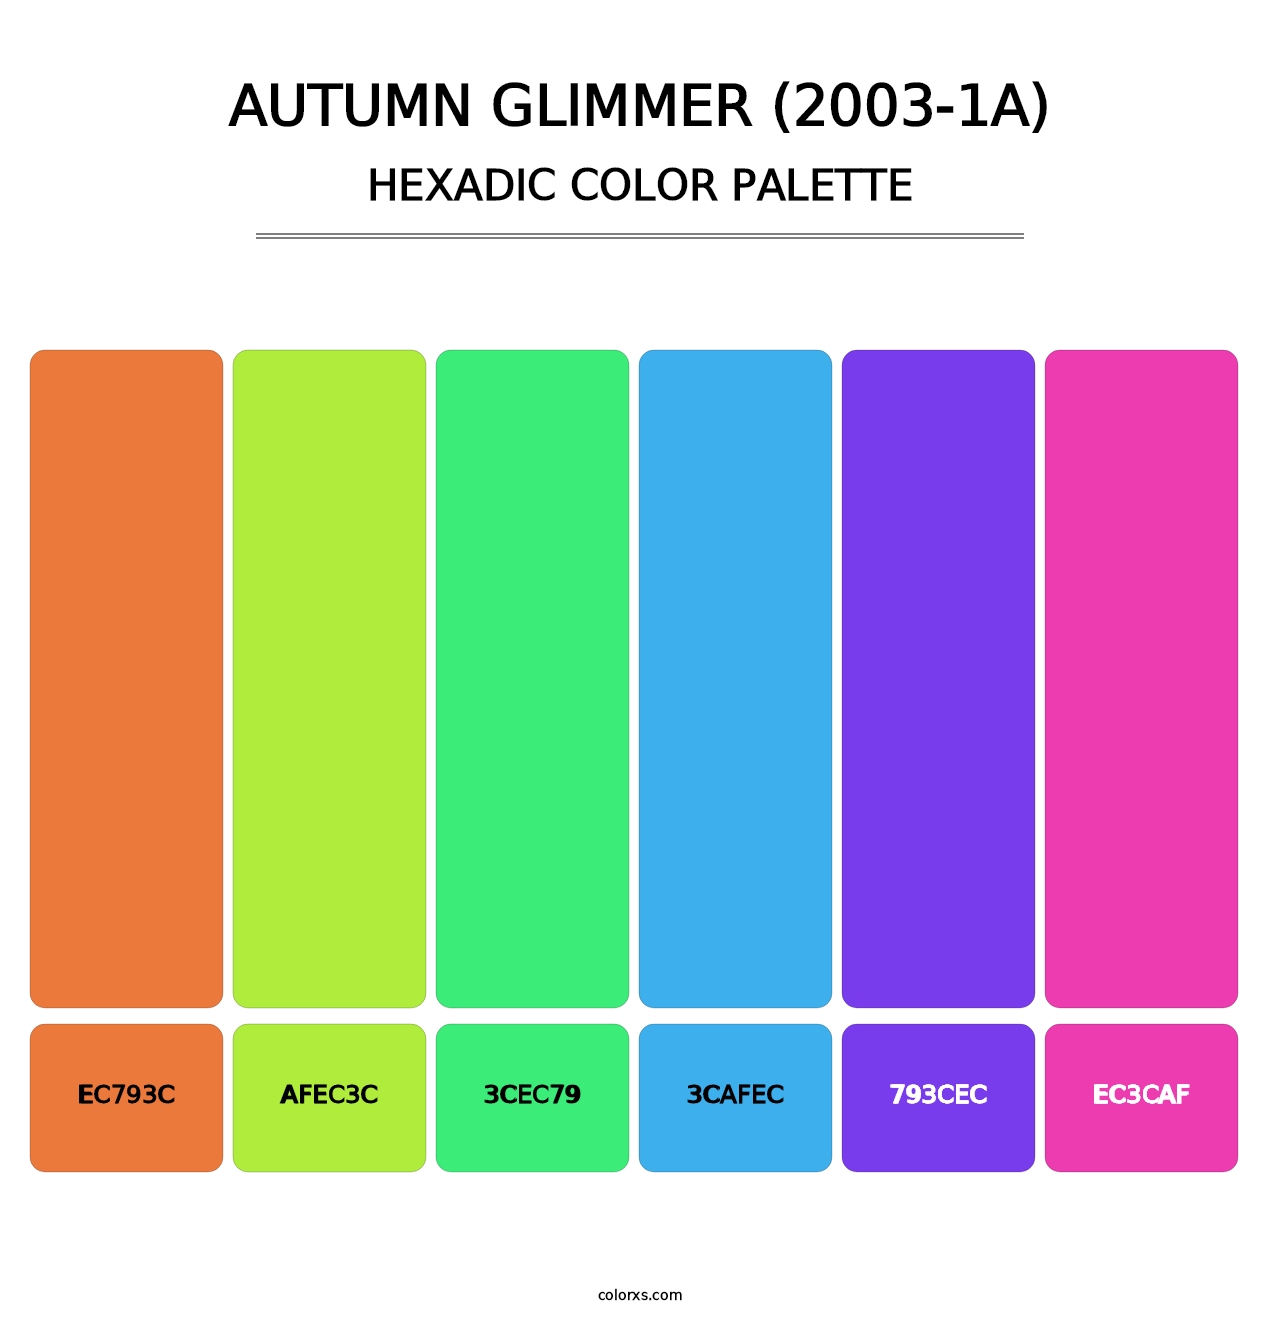 Autumn Glimmer (2003-1A) - Hexadic Color Palette